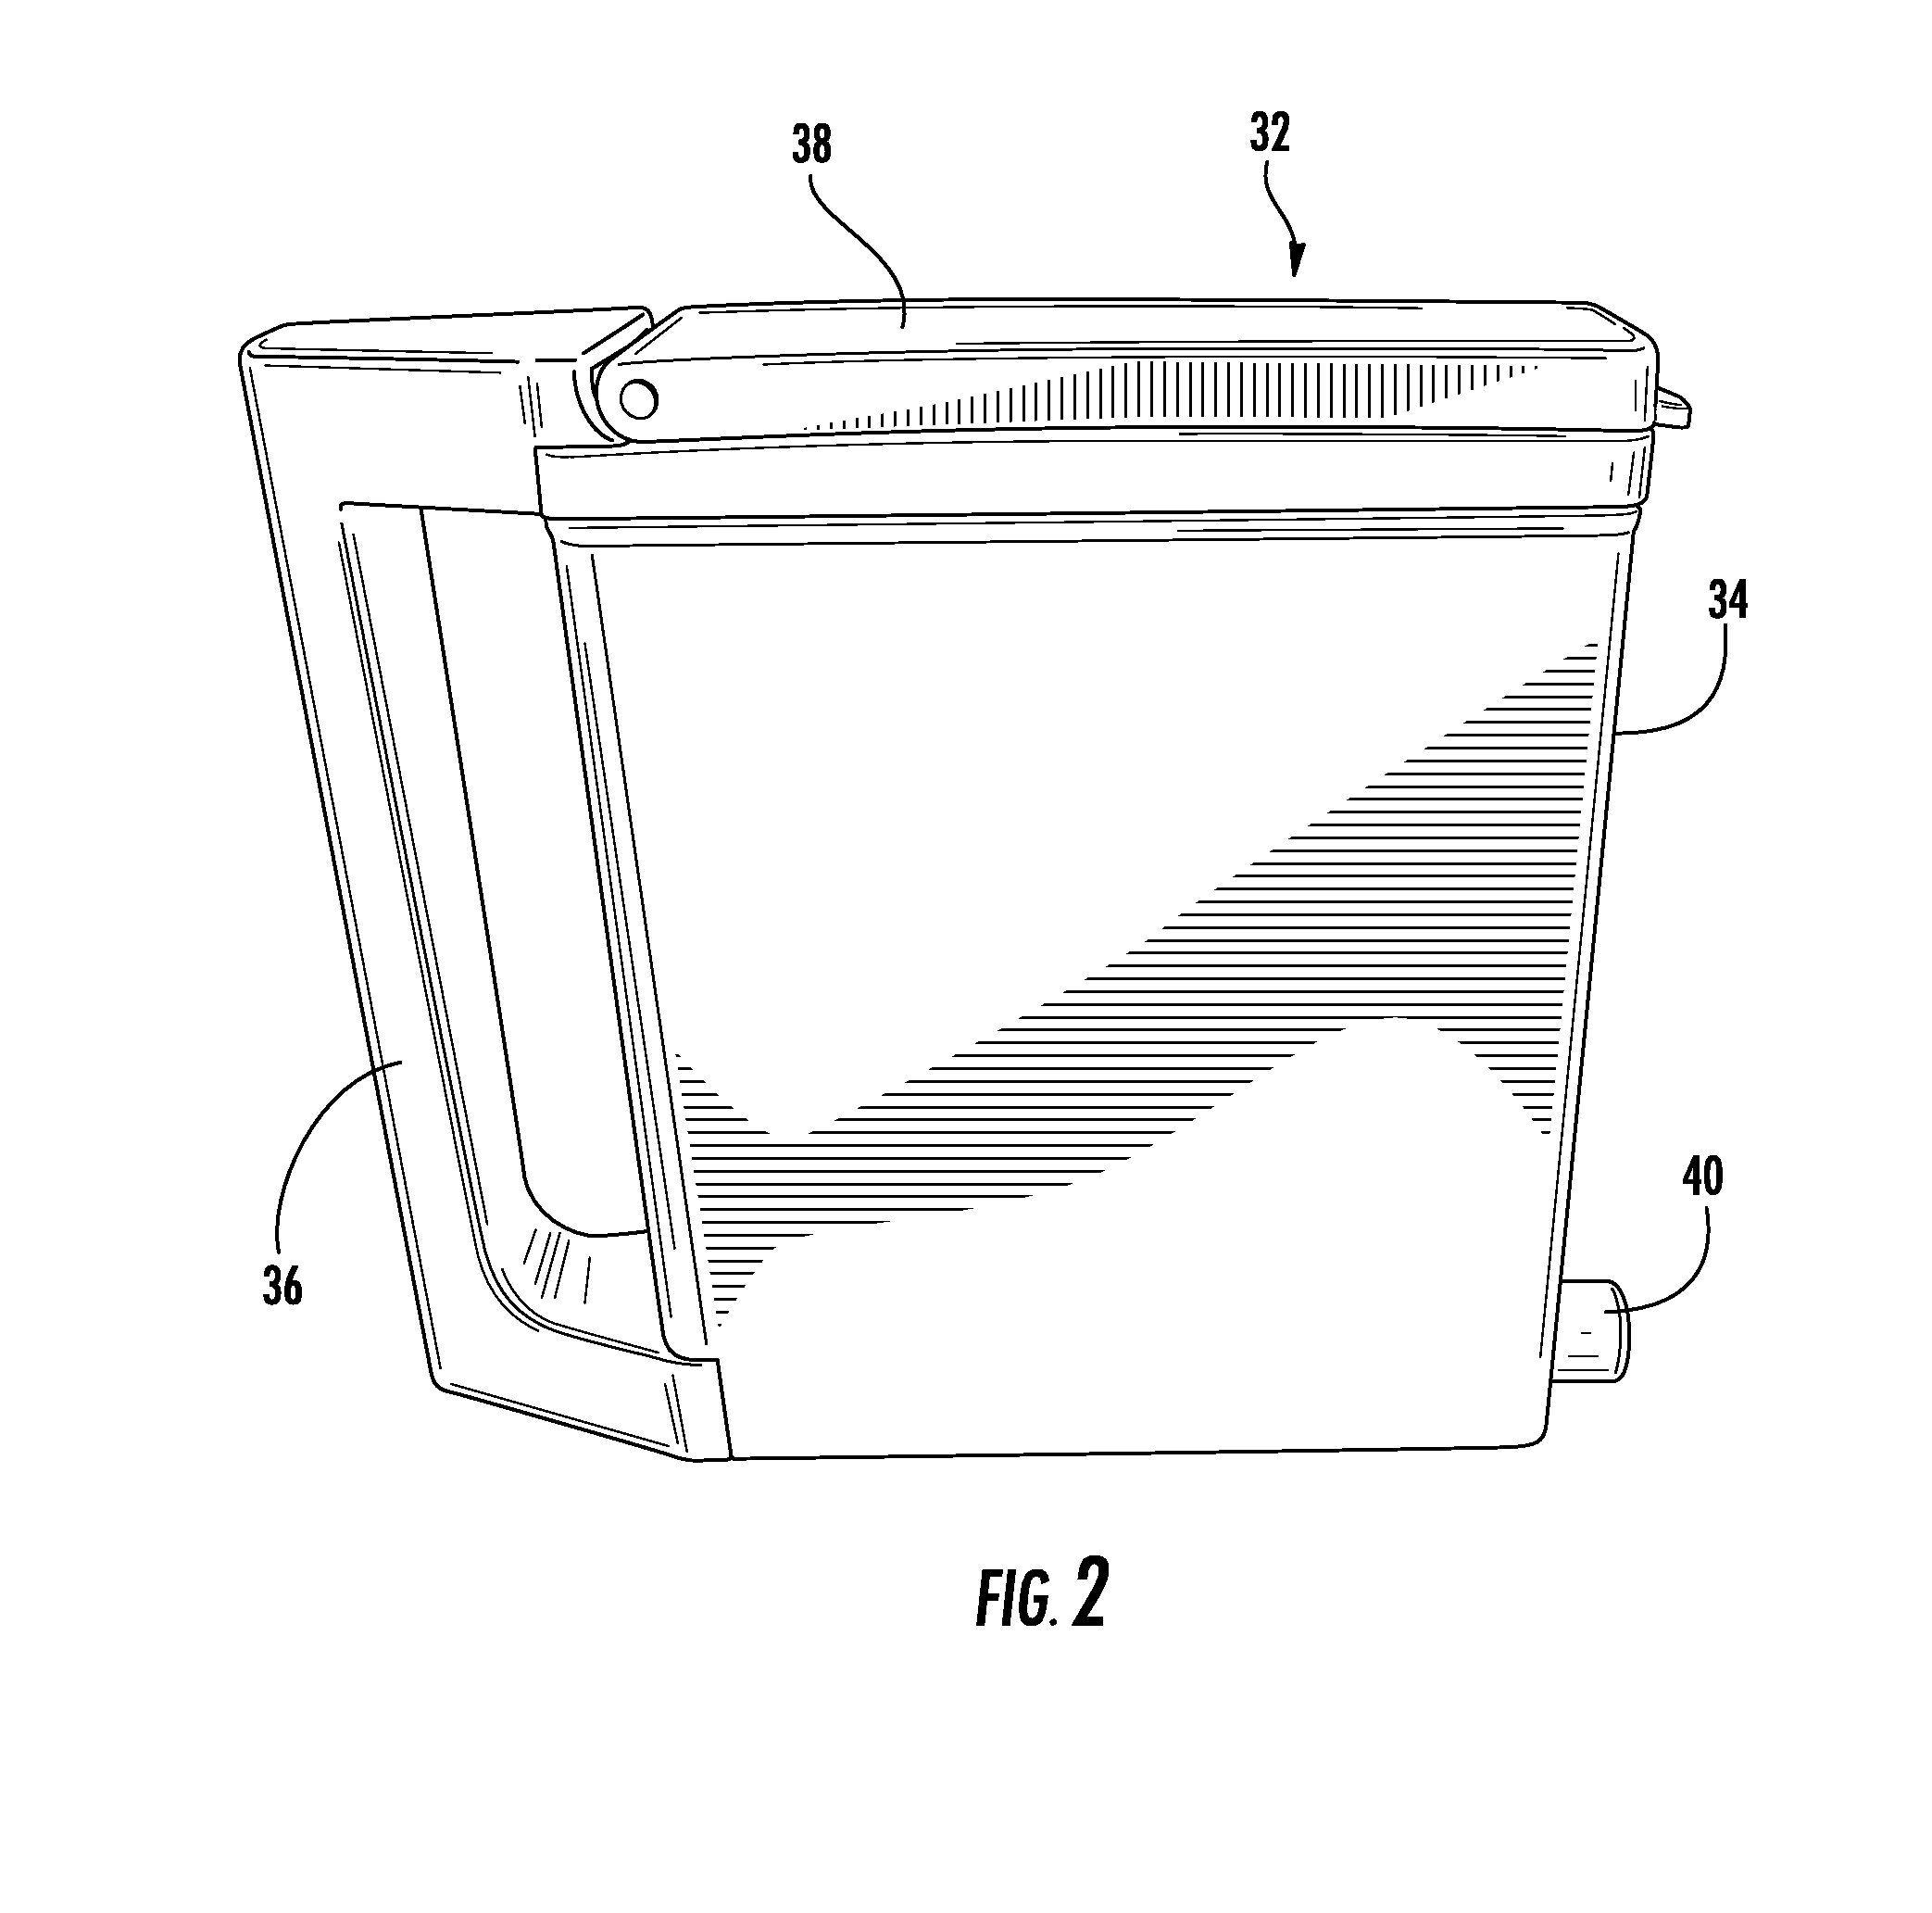 Home appliance with recessed water vessel housing